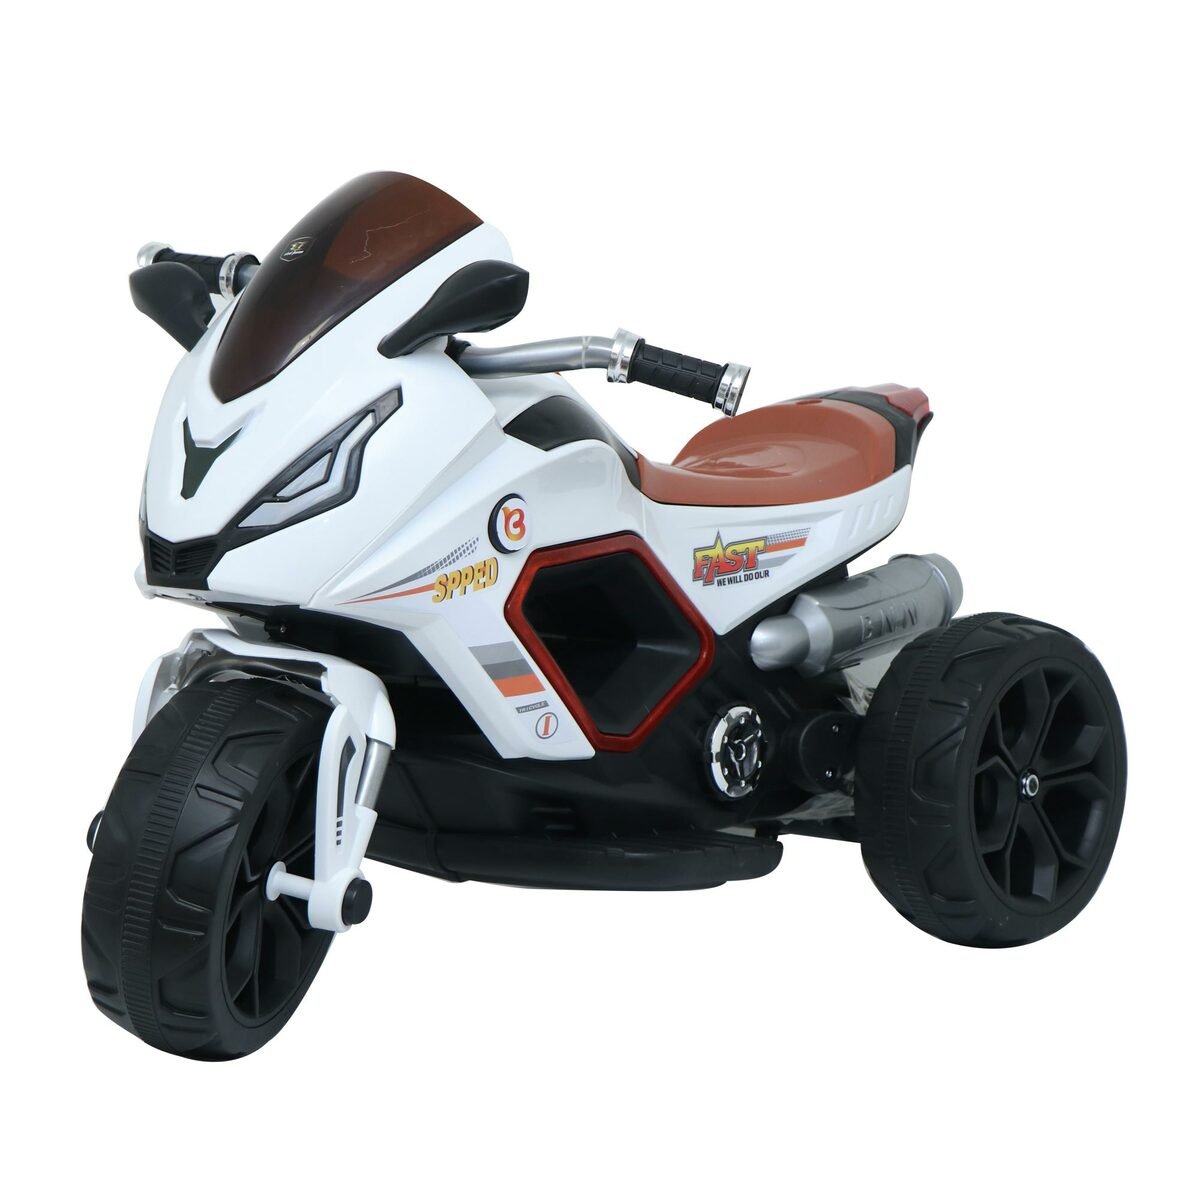 Skid Fusion Ride On Bike Rechargeable K-1200 White